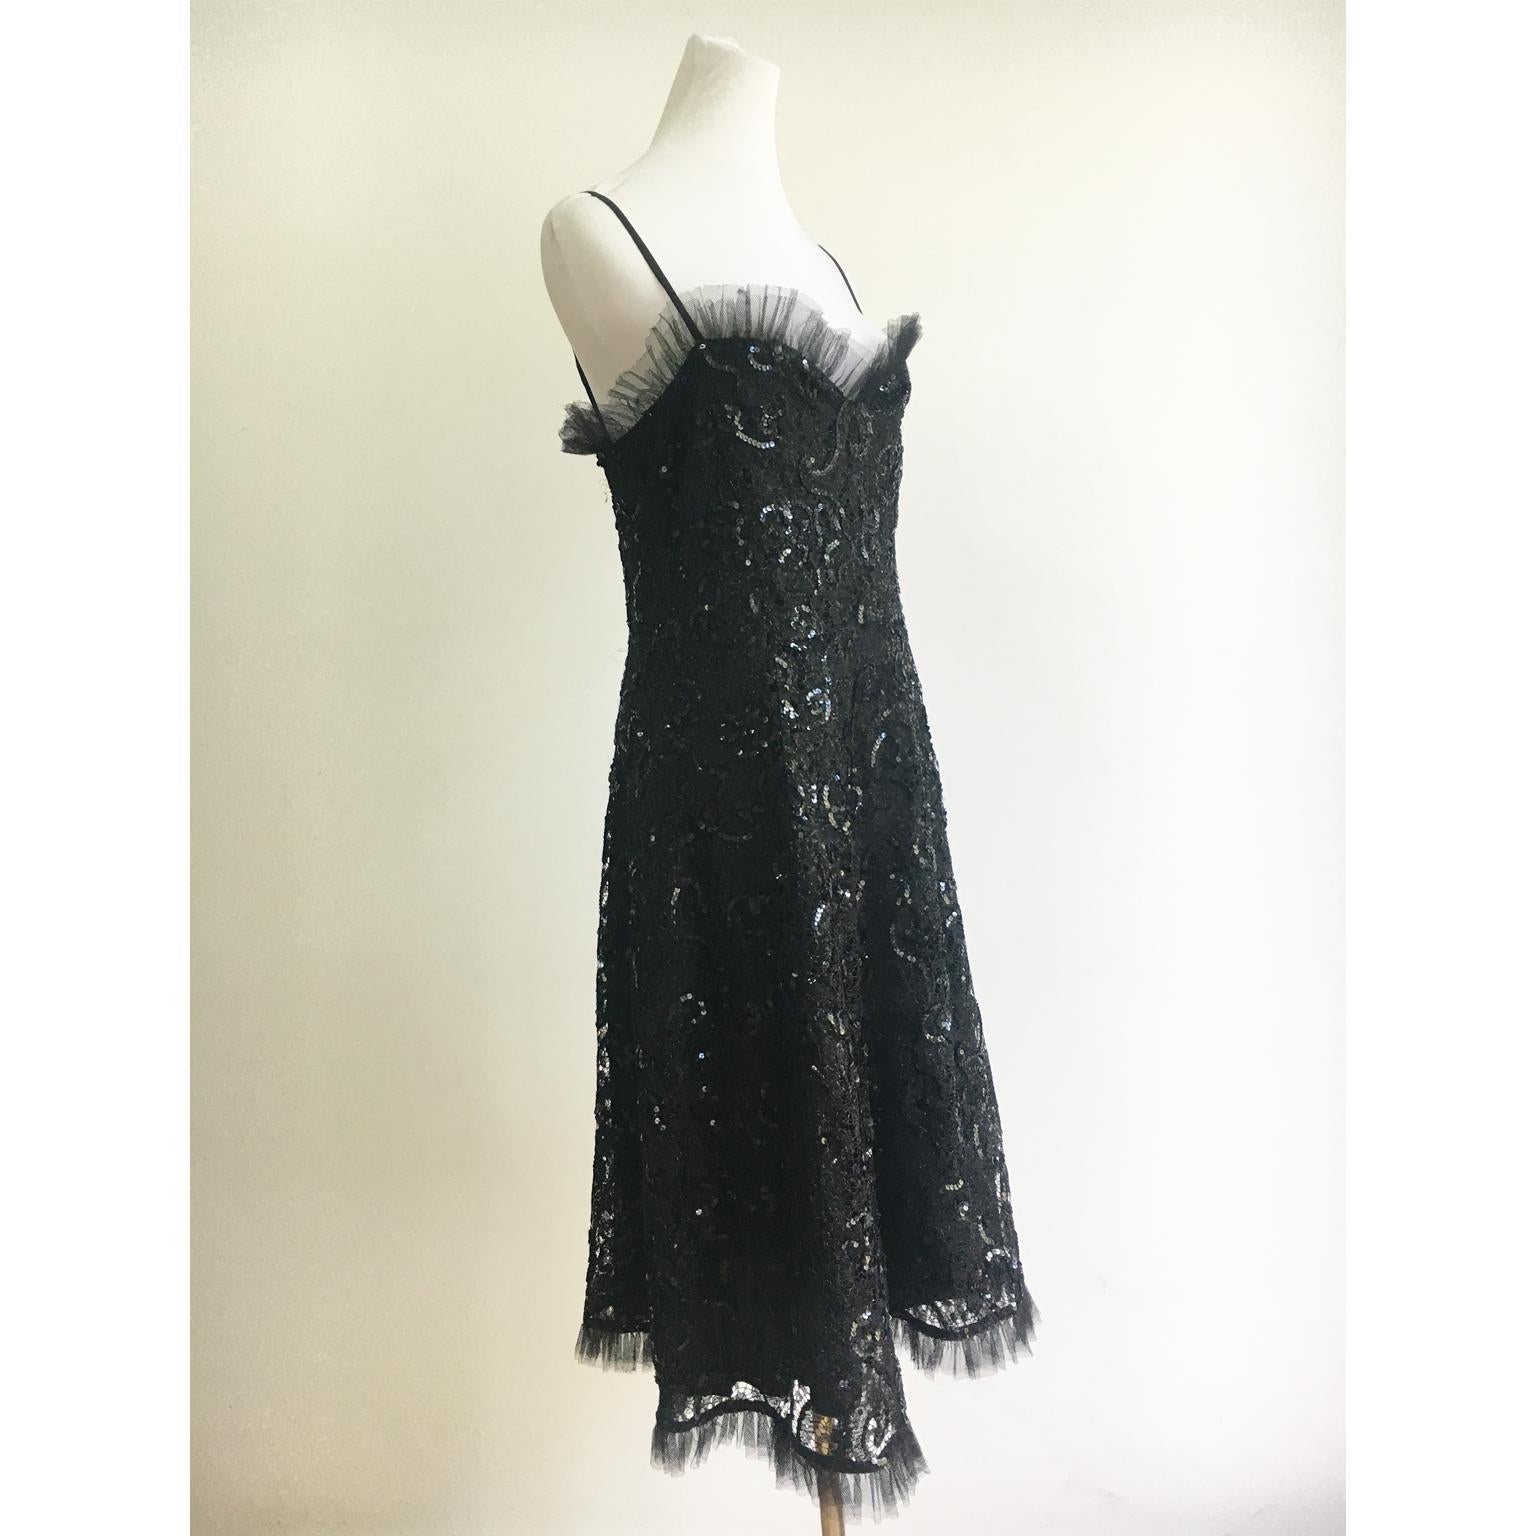 Yves Saint Laurent black lace sequin dress from AW 1987.
The dress has beautiful cut and the pattern in the lace is detailed with curving rows of glossy black sequins. 
The bodice and hem are finished with a silk tulle ruffle. 
Fully lined in a